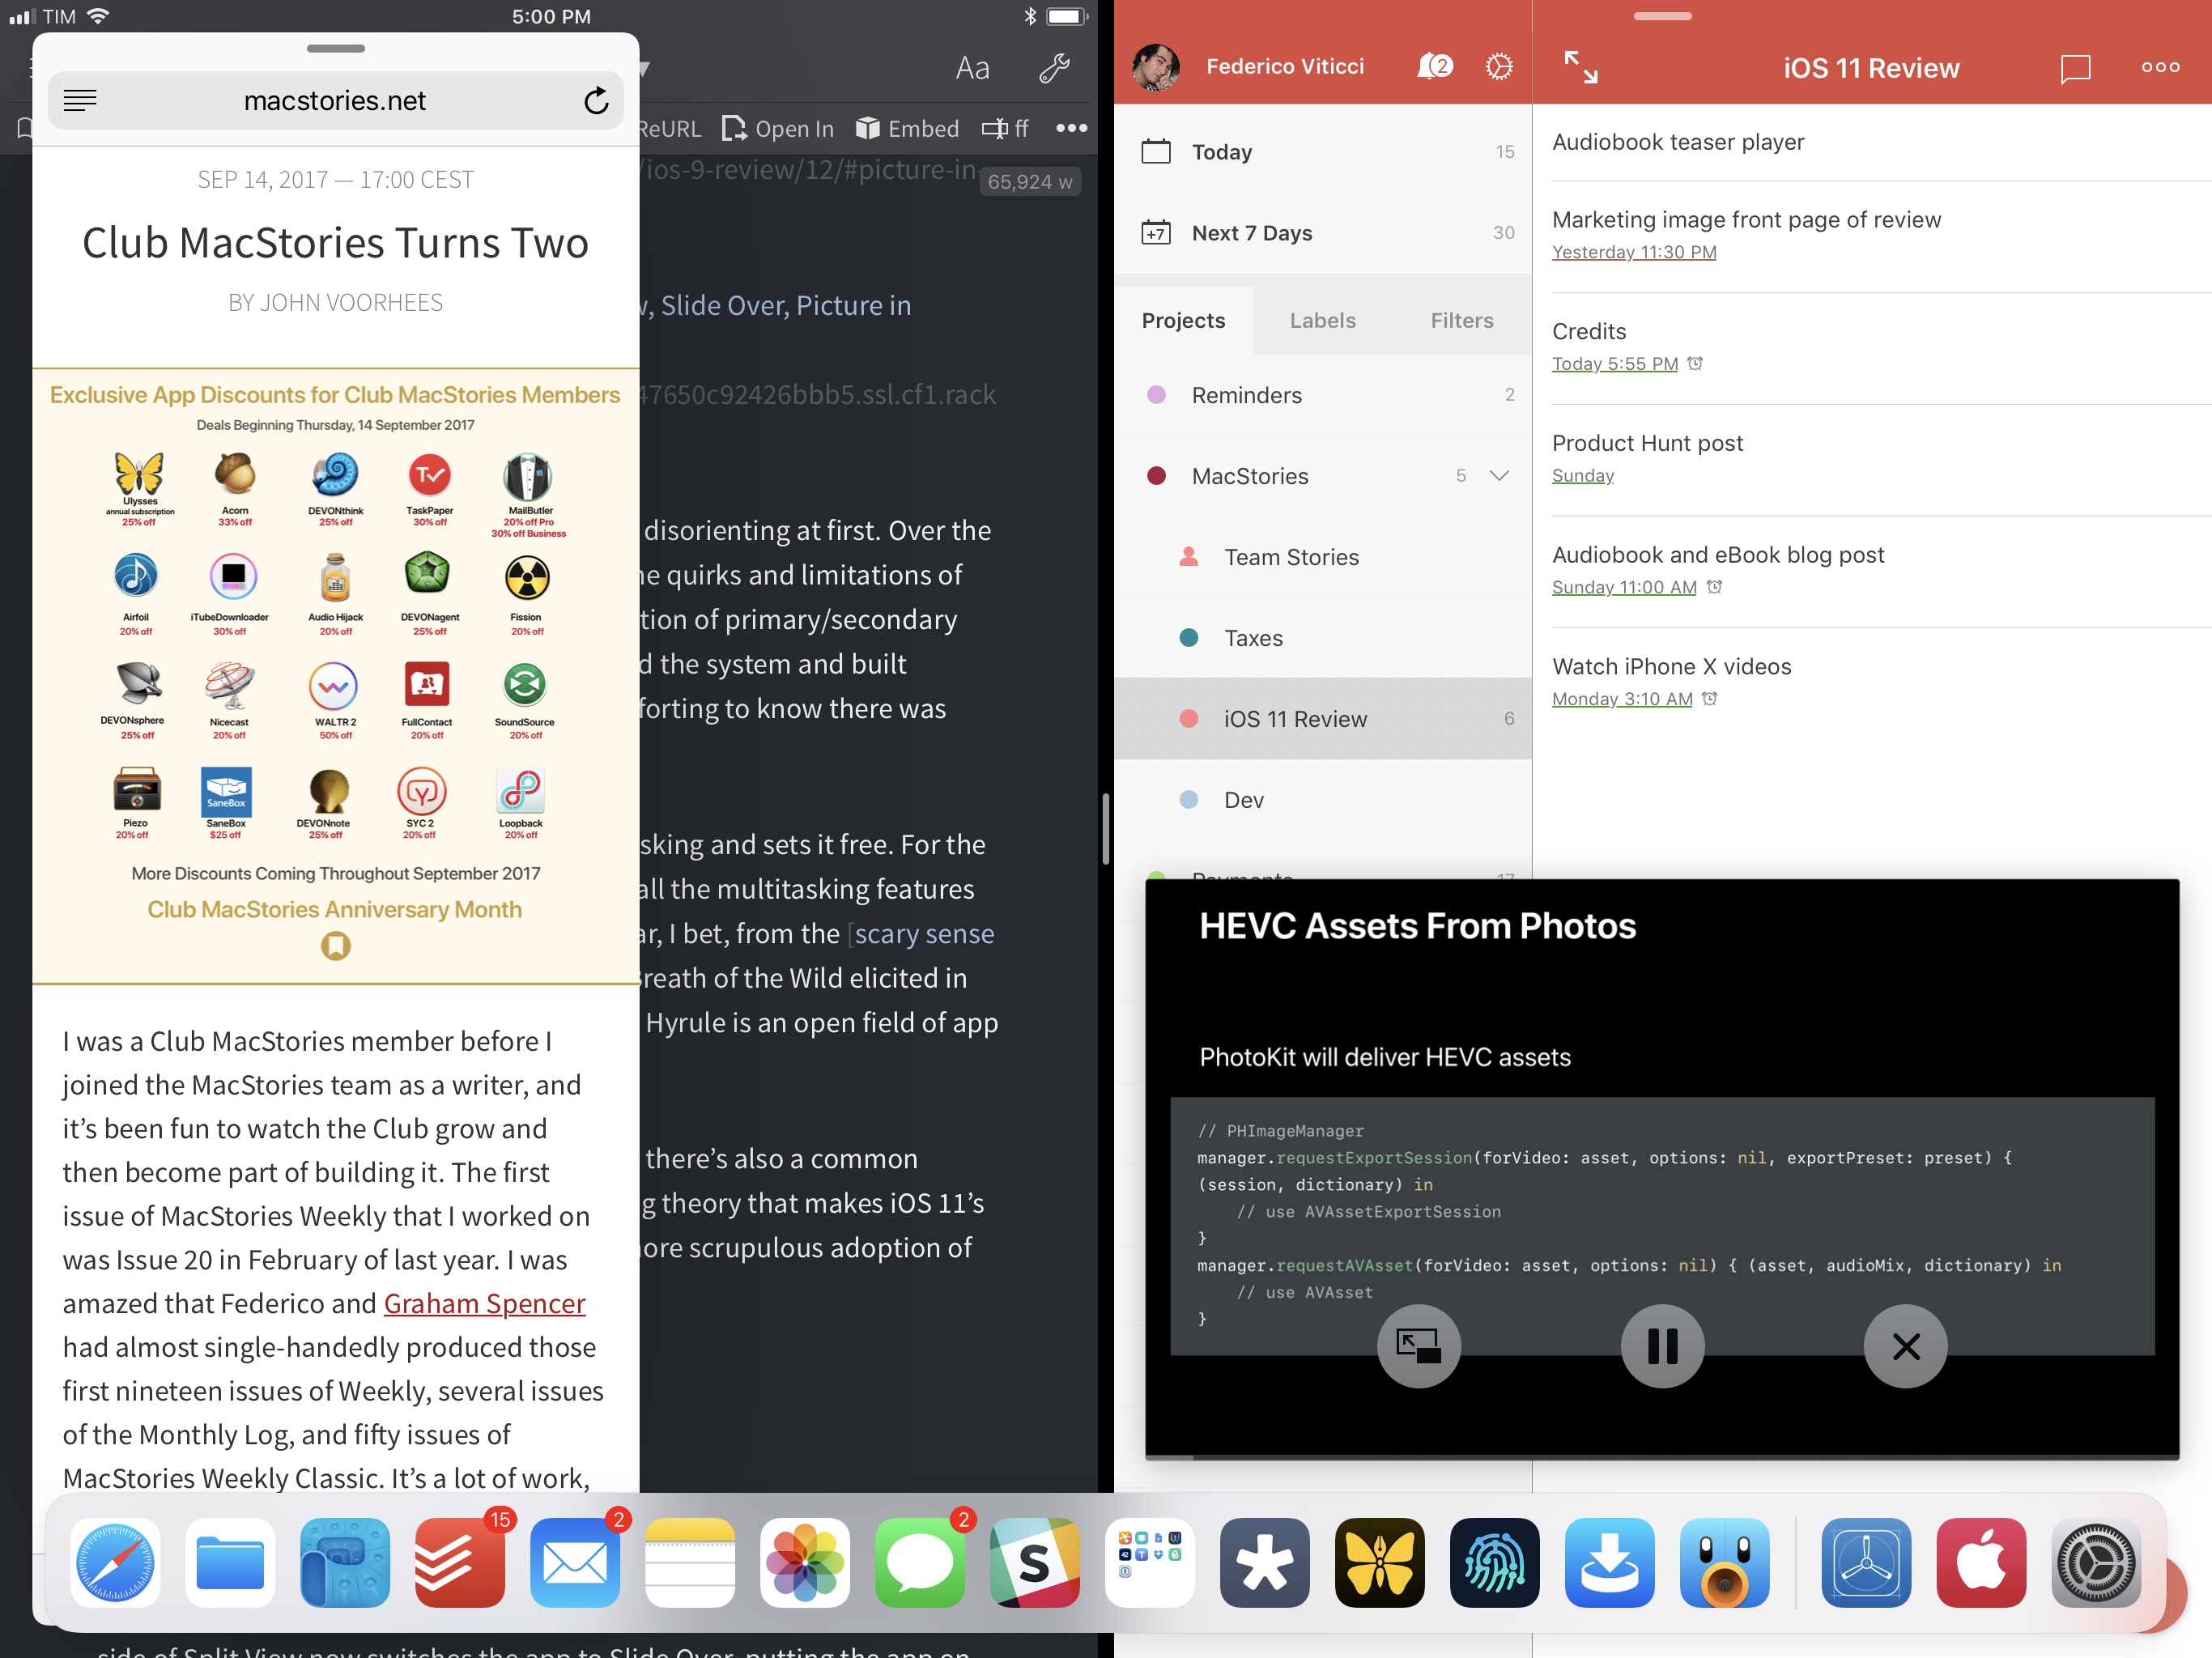 The new age of iPad multitasking: Split View, Slide Over, Picture in Picture, and the dock.